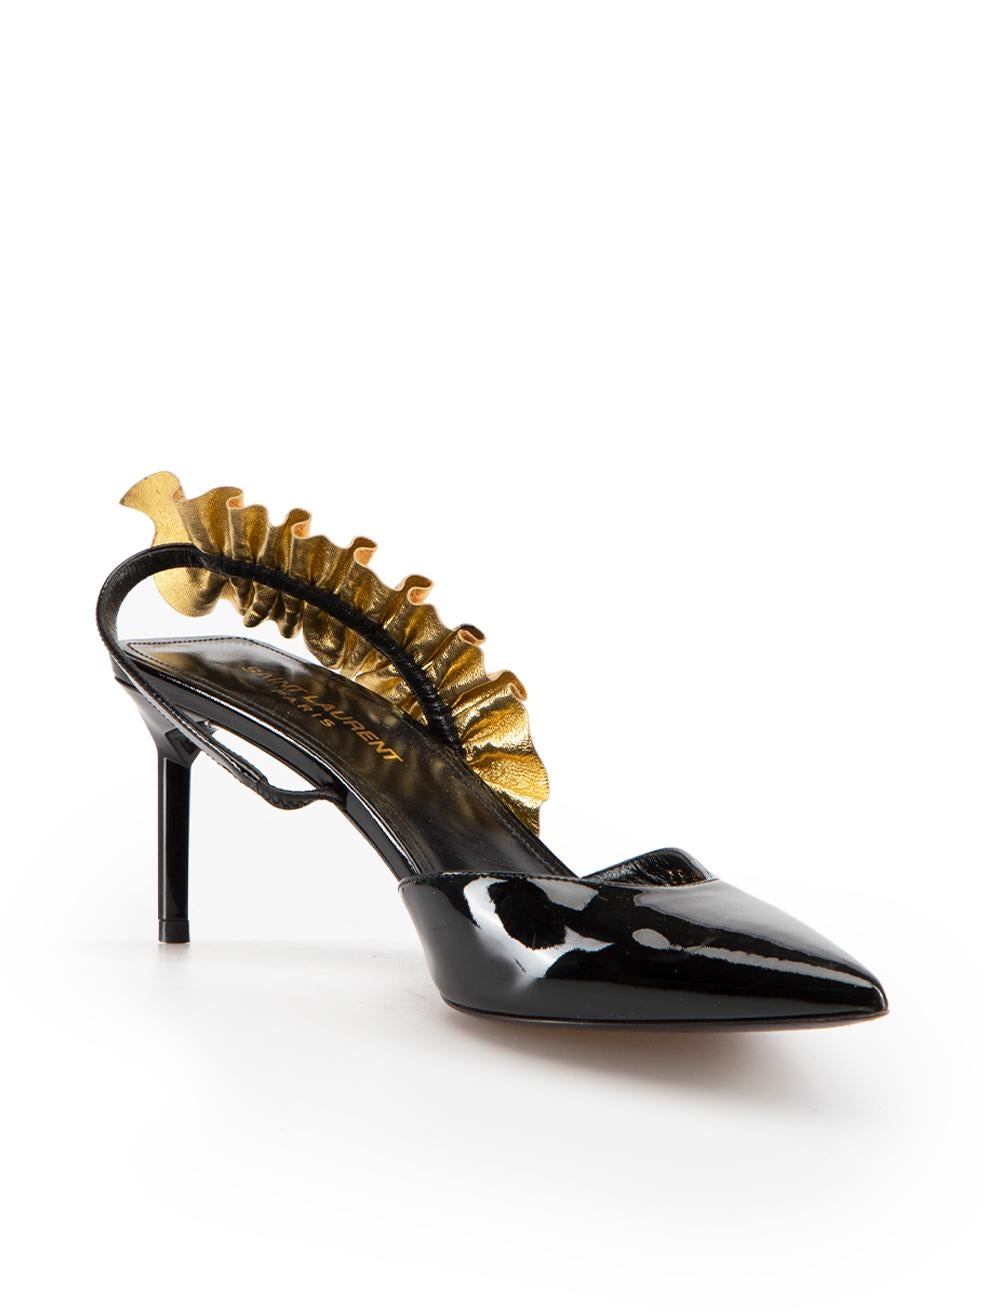 CONDITION is Very good. Minimal wear to heels is evident. Minimal scuffing to patent leather on this used Saint Laurent designer resale item.



Details


Black

Patent leather

Mid-heels

Point-toe

Slingback strap

Gold leather leaf detail on